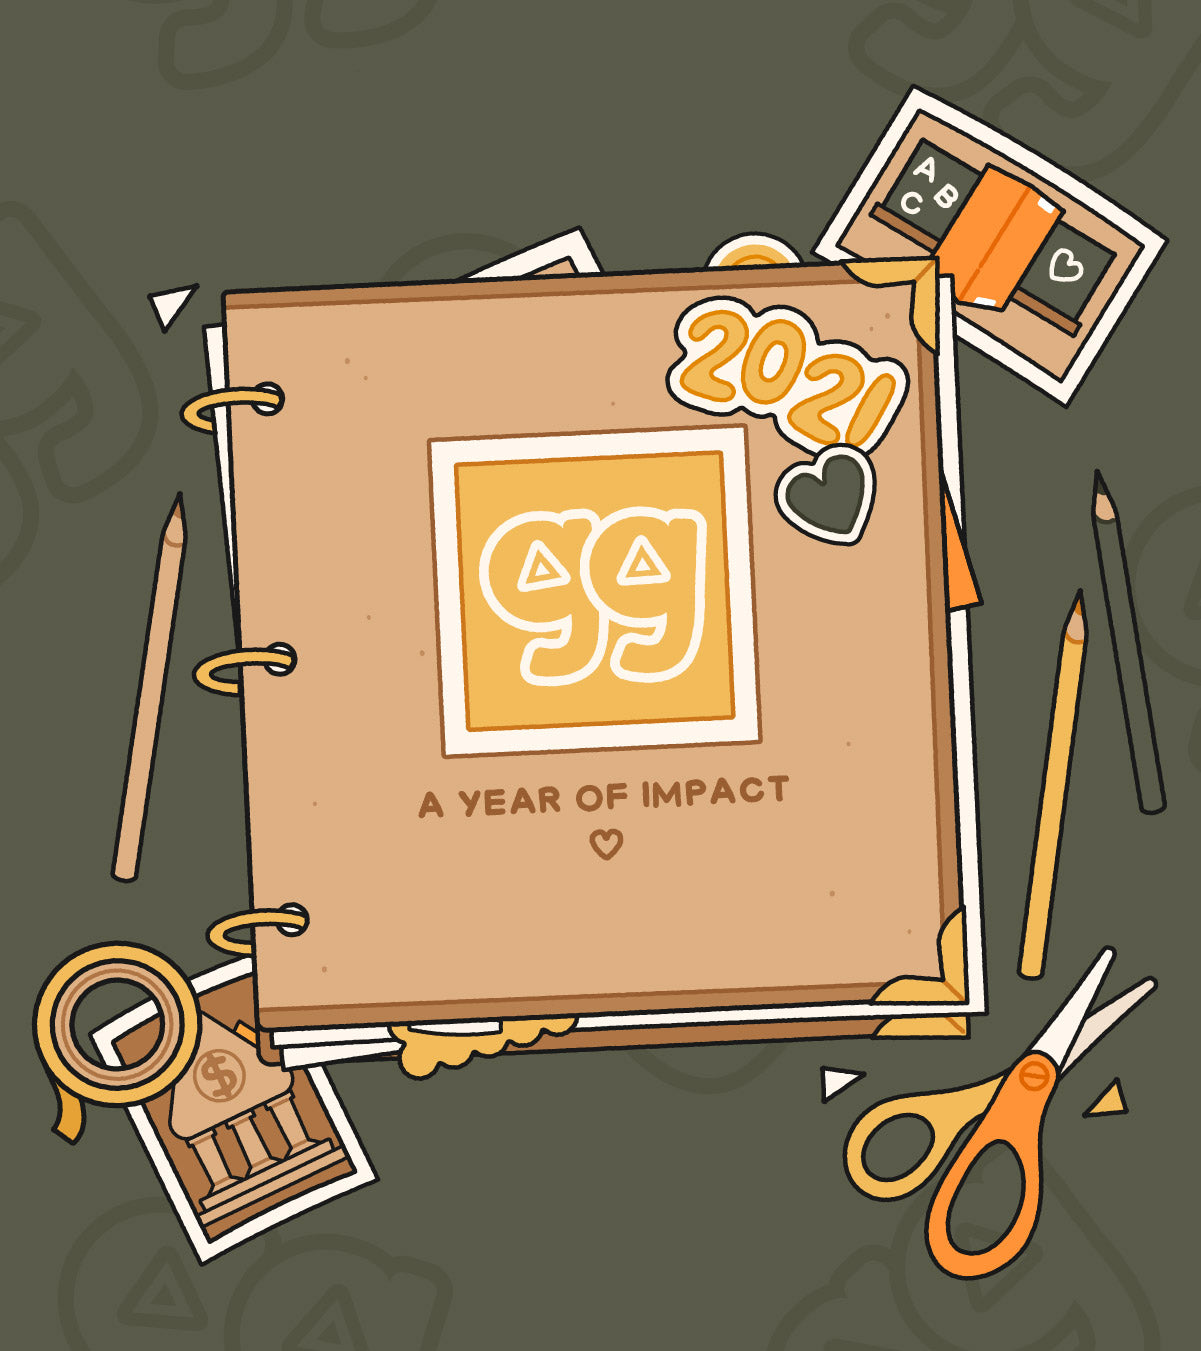 A scrapbook illustration with "gg" logo and "A Year of Impact", with scissors, crafting supplies, and a "2021" sticker on the outside of the scrapbook